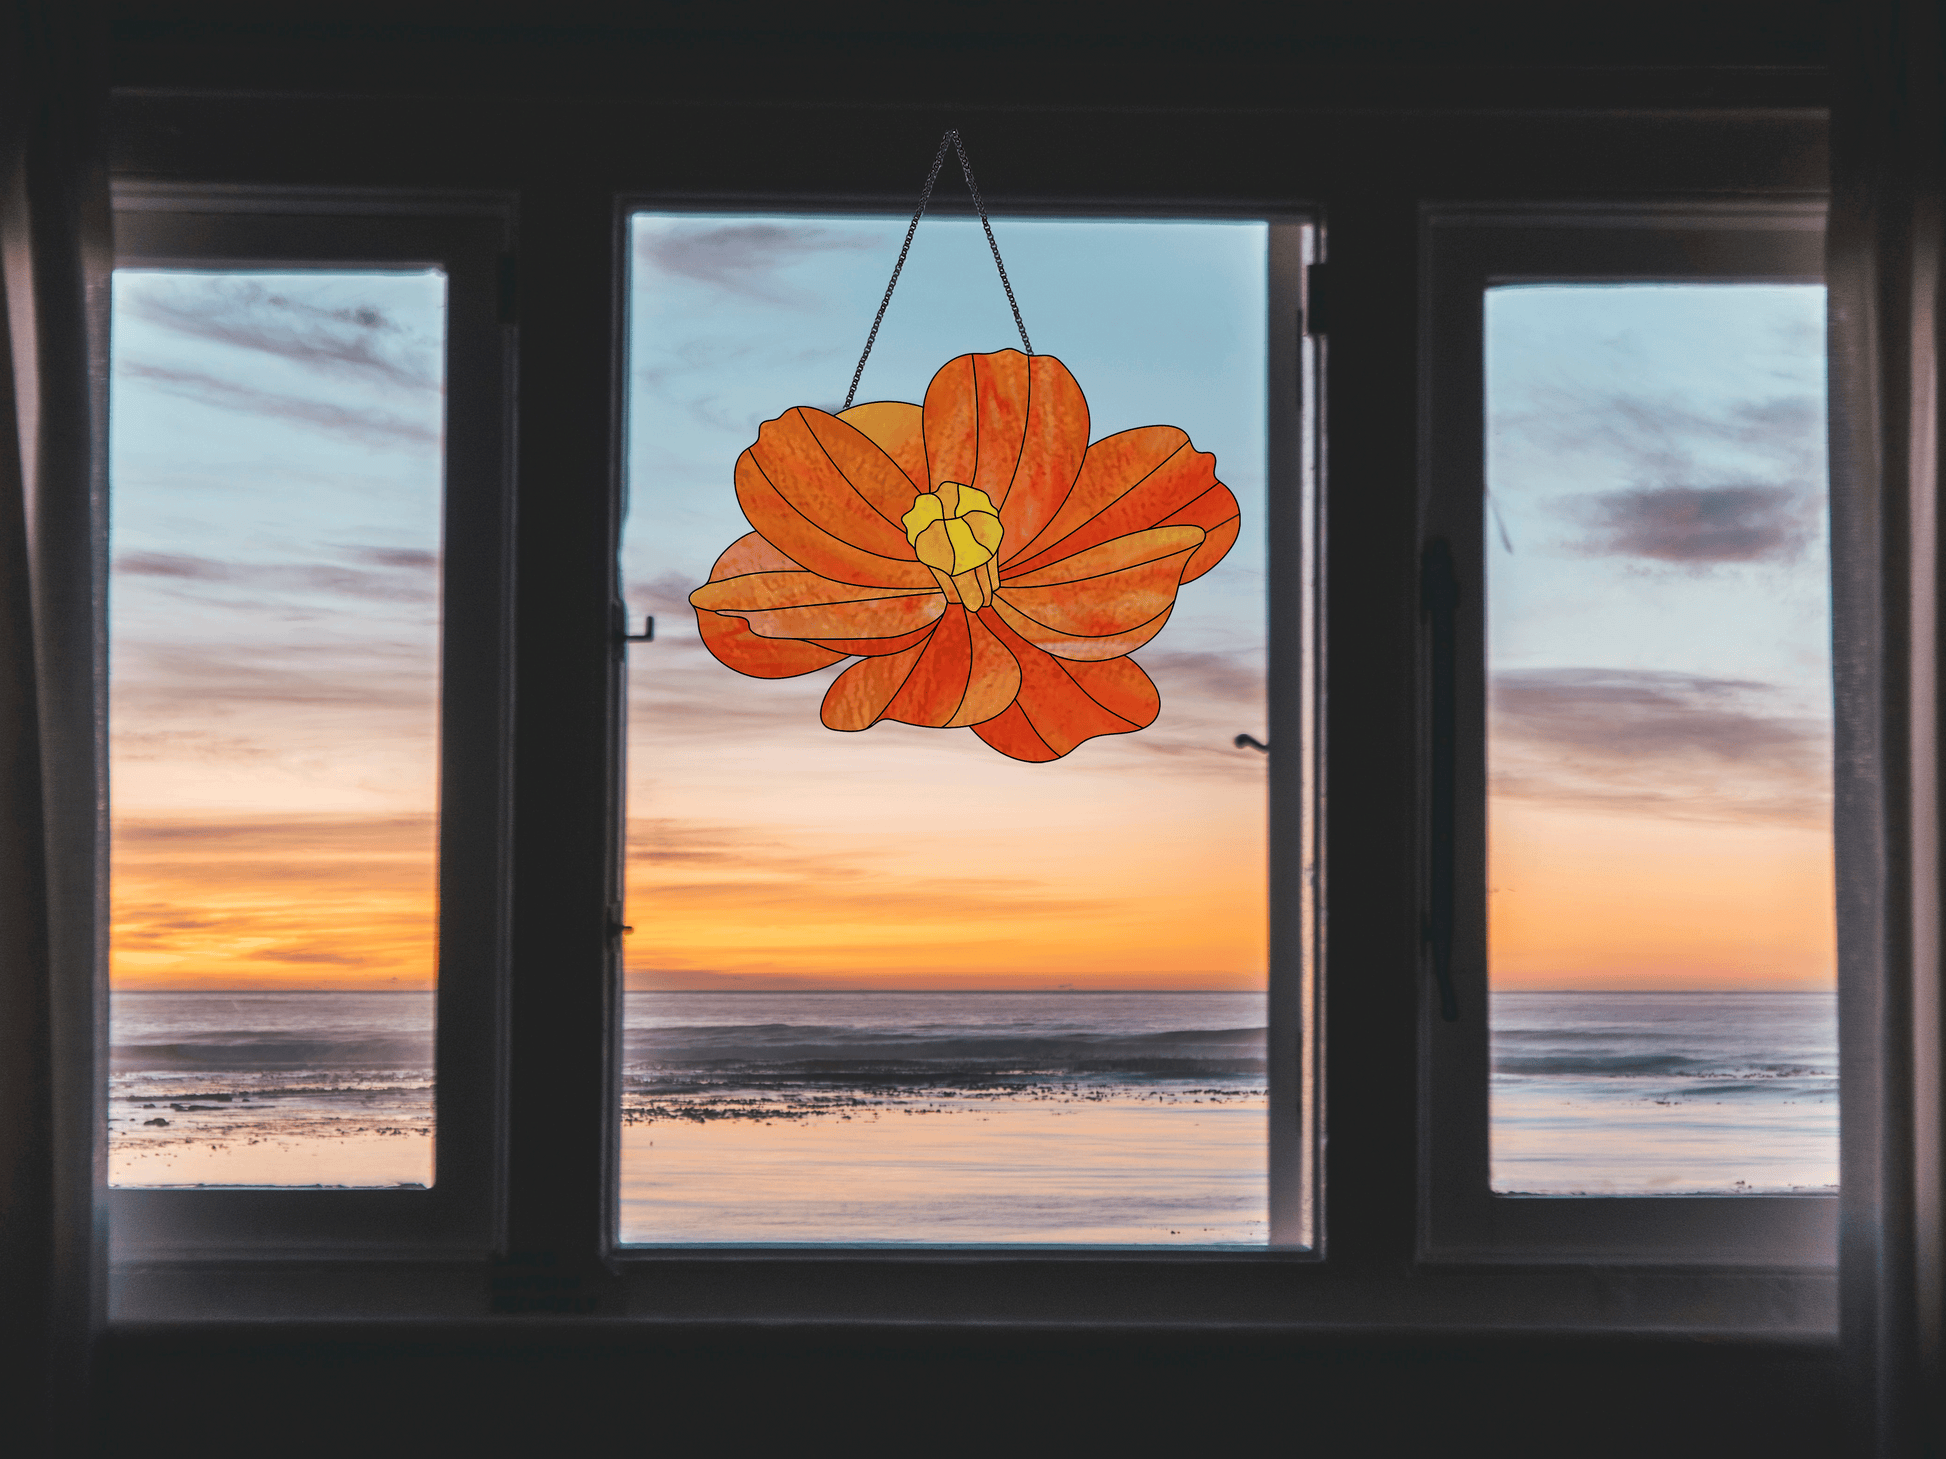 Stained glass pattern for a giant cosmos flower, instant PDF download, shown hanging in a window with a sunset